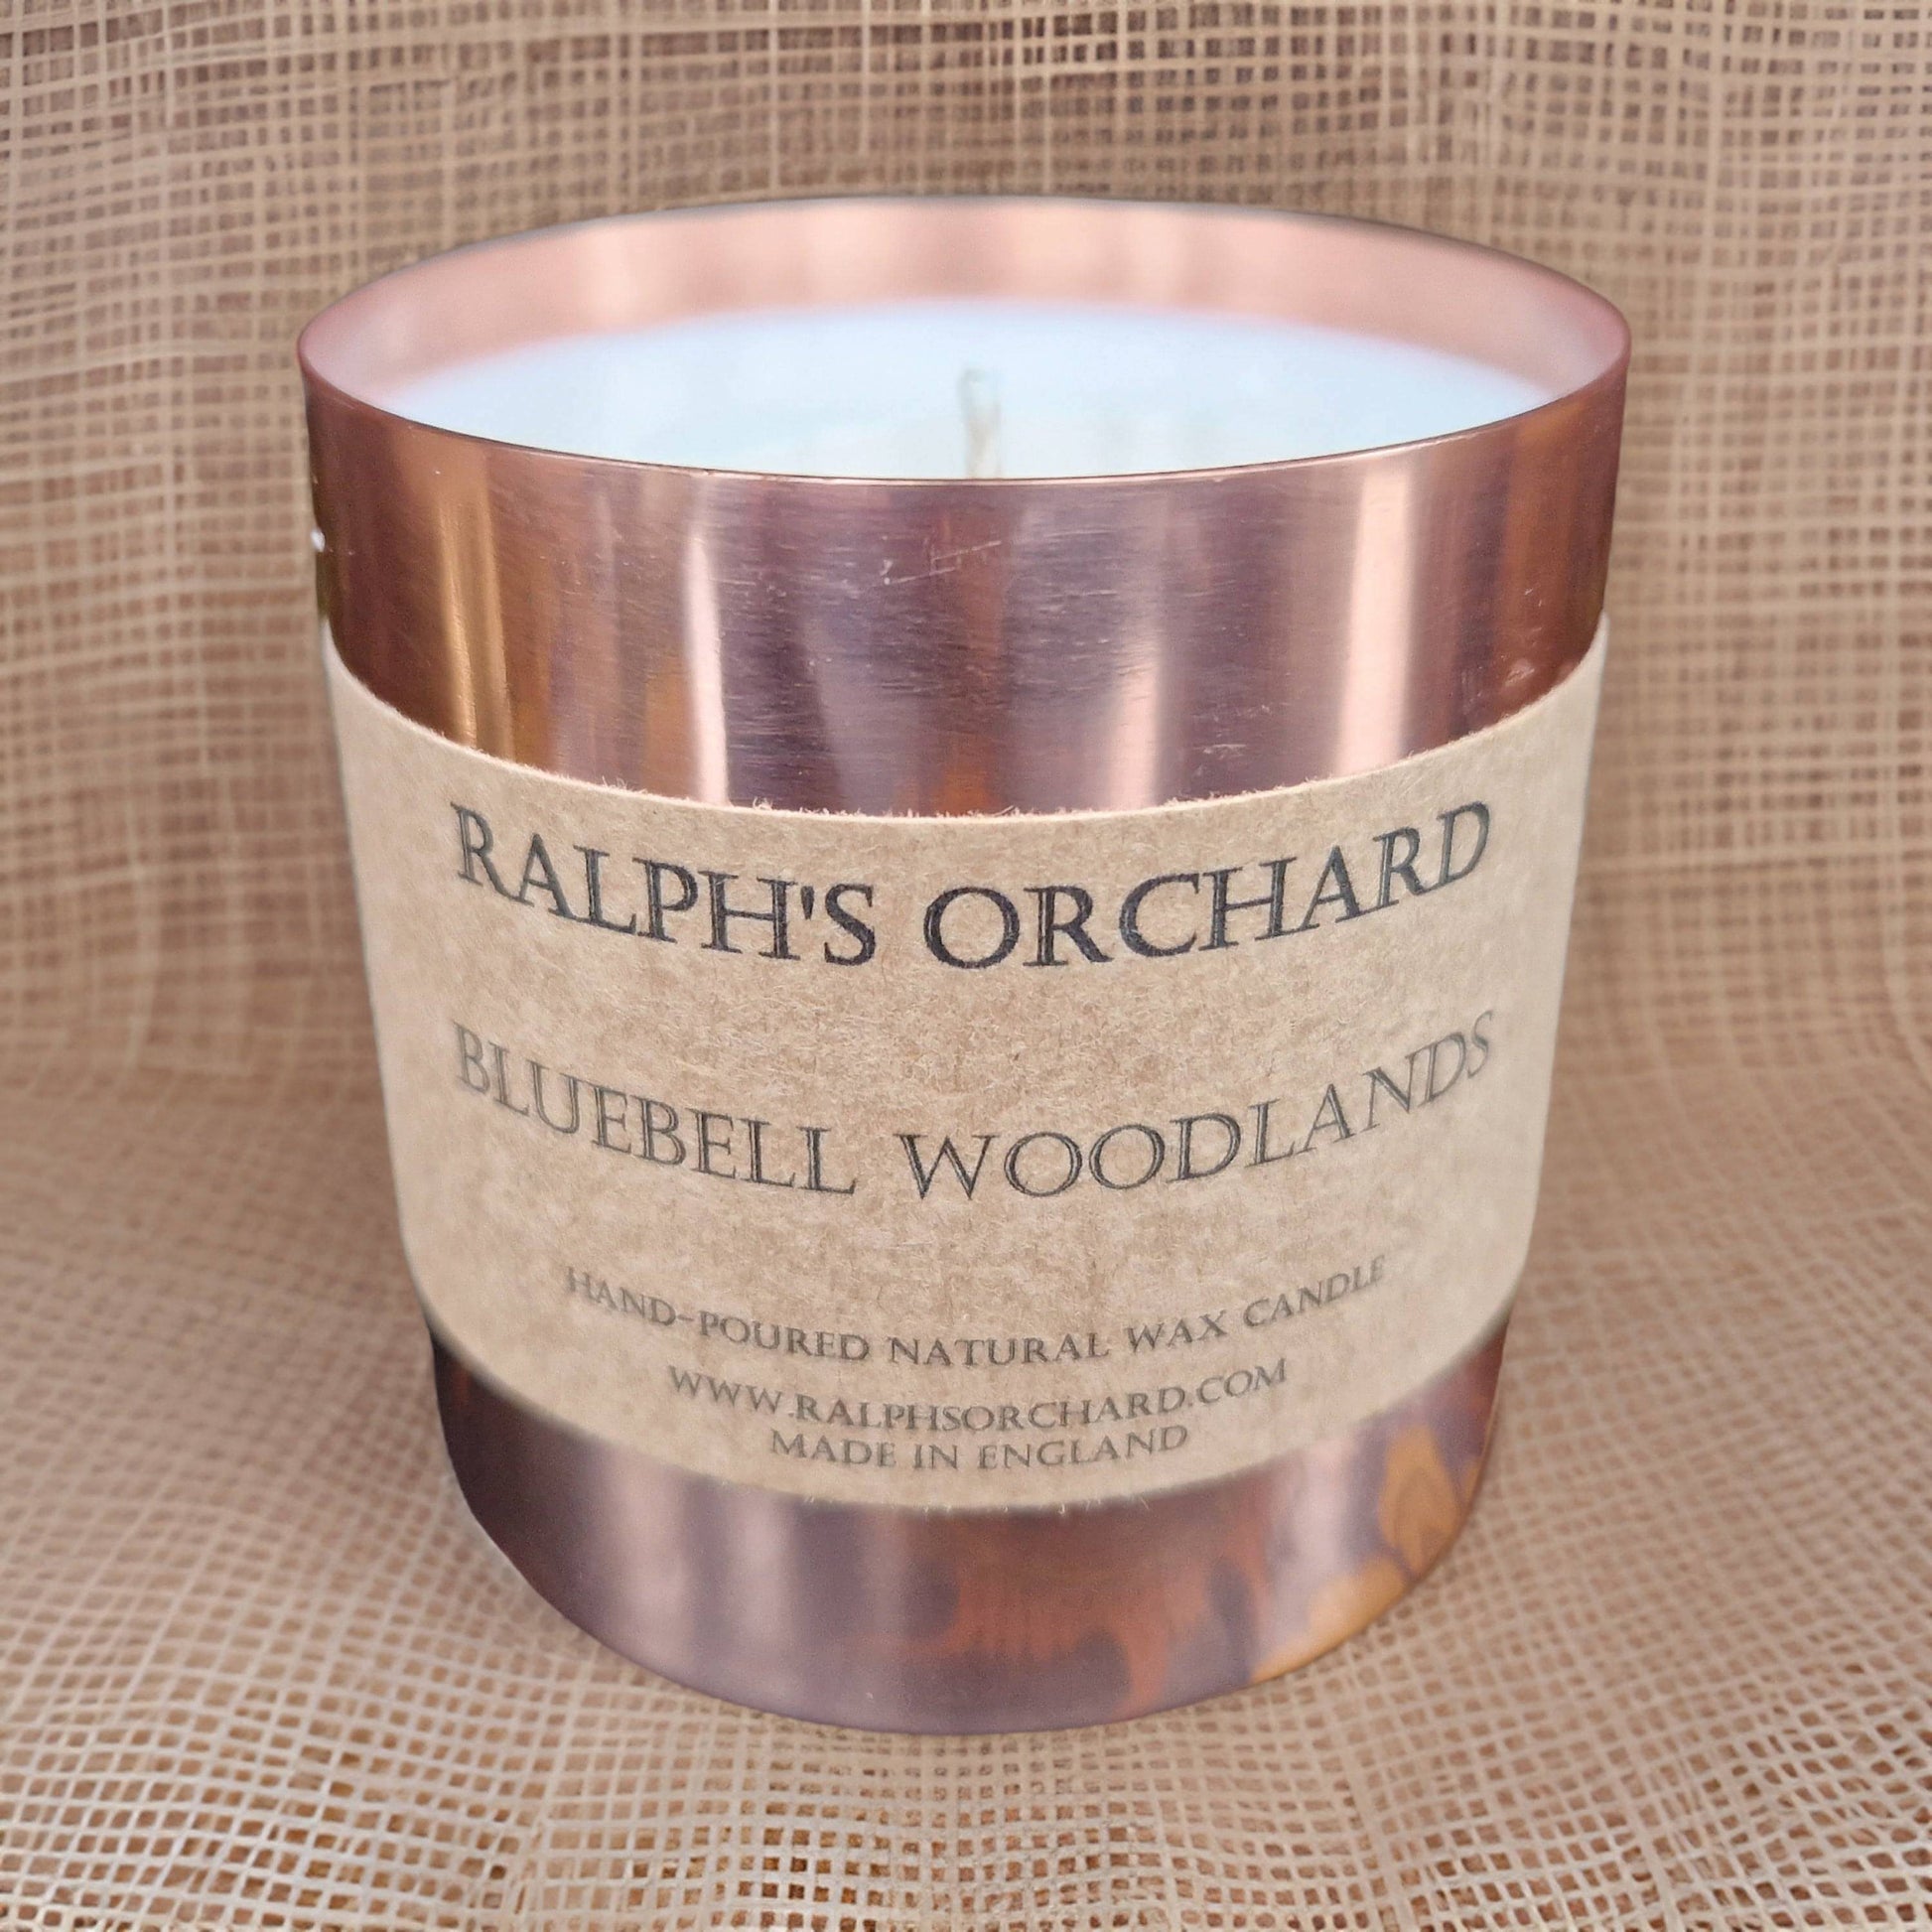 Bluebell Woodlands scented candle